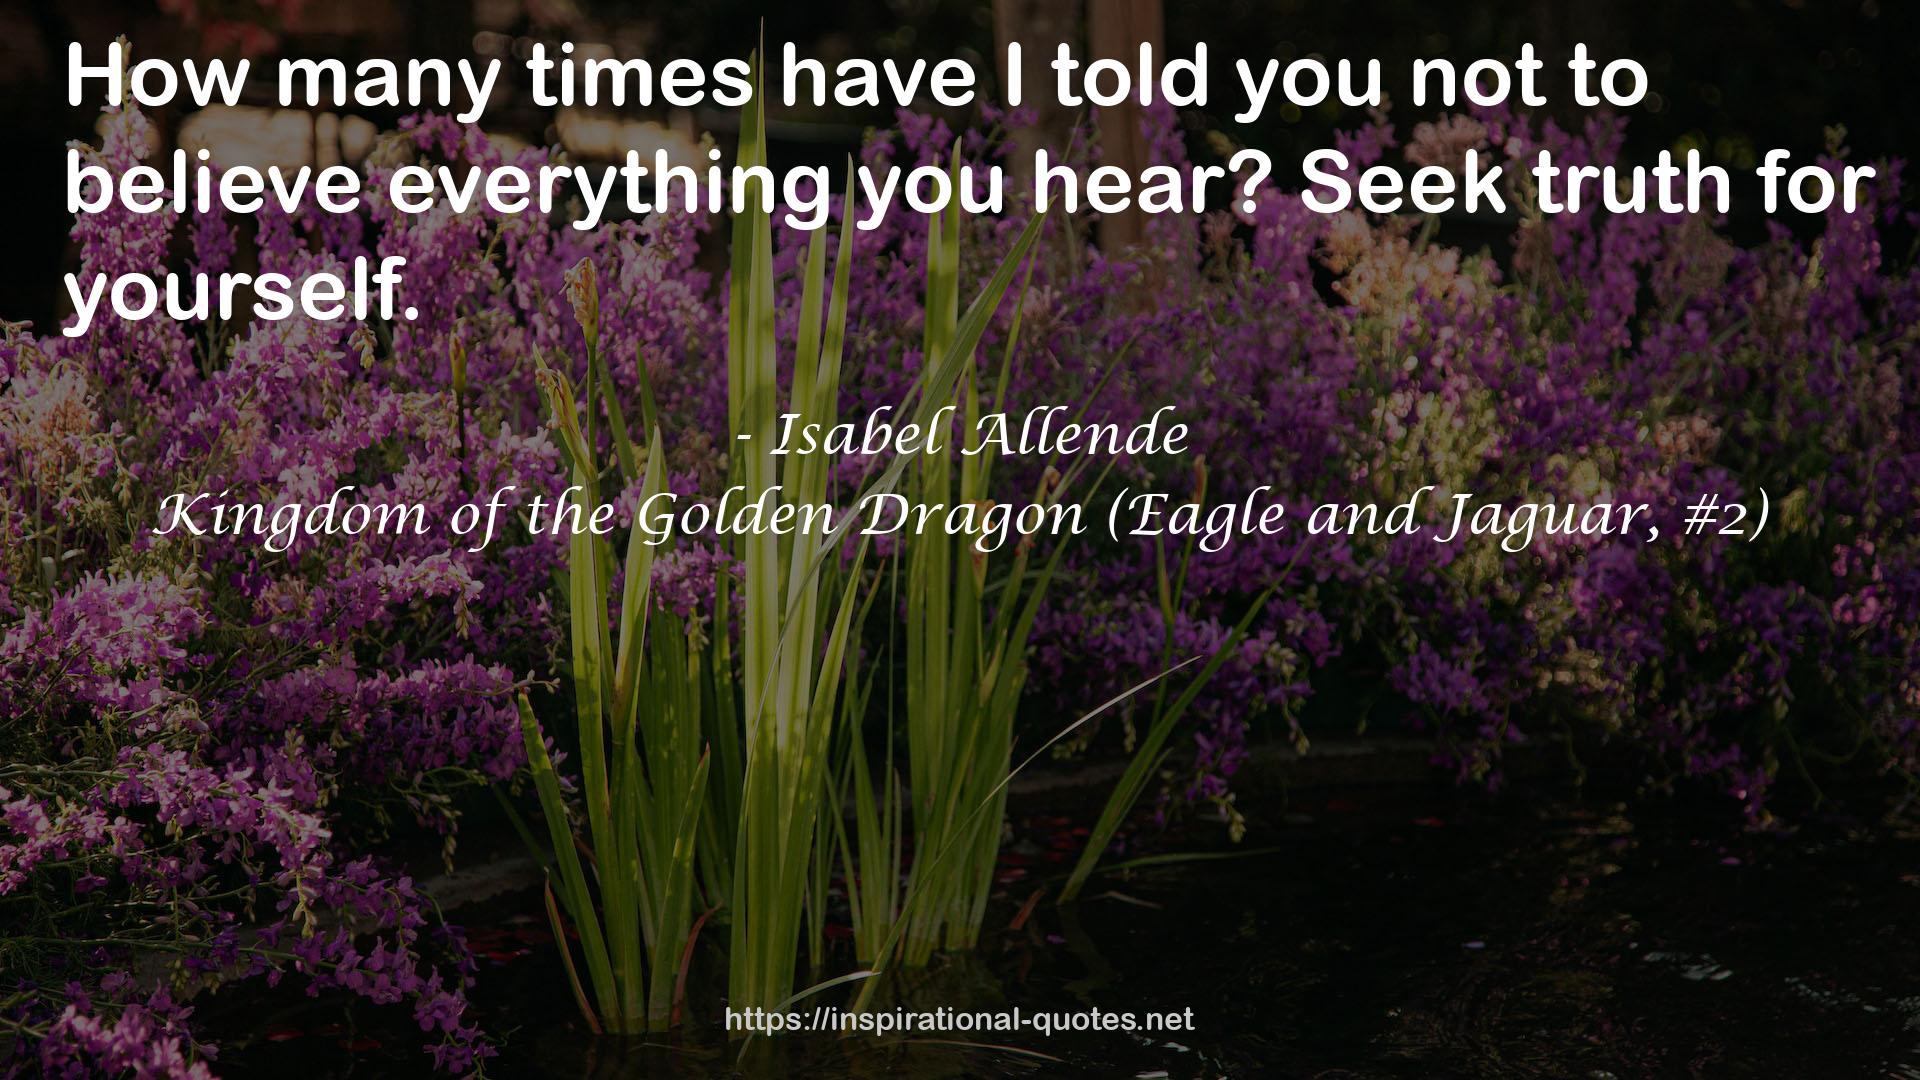 Kingdom of the Golden Dragon (Eagle and Jaguar, #2) QUOTES